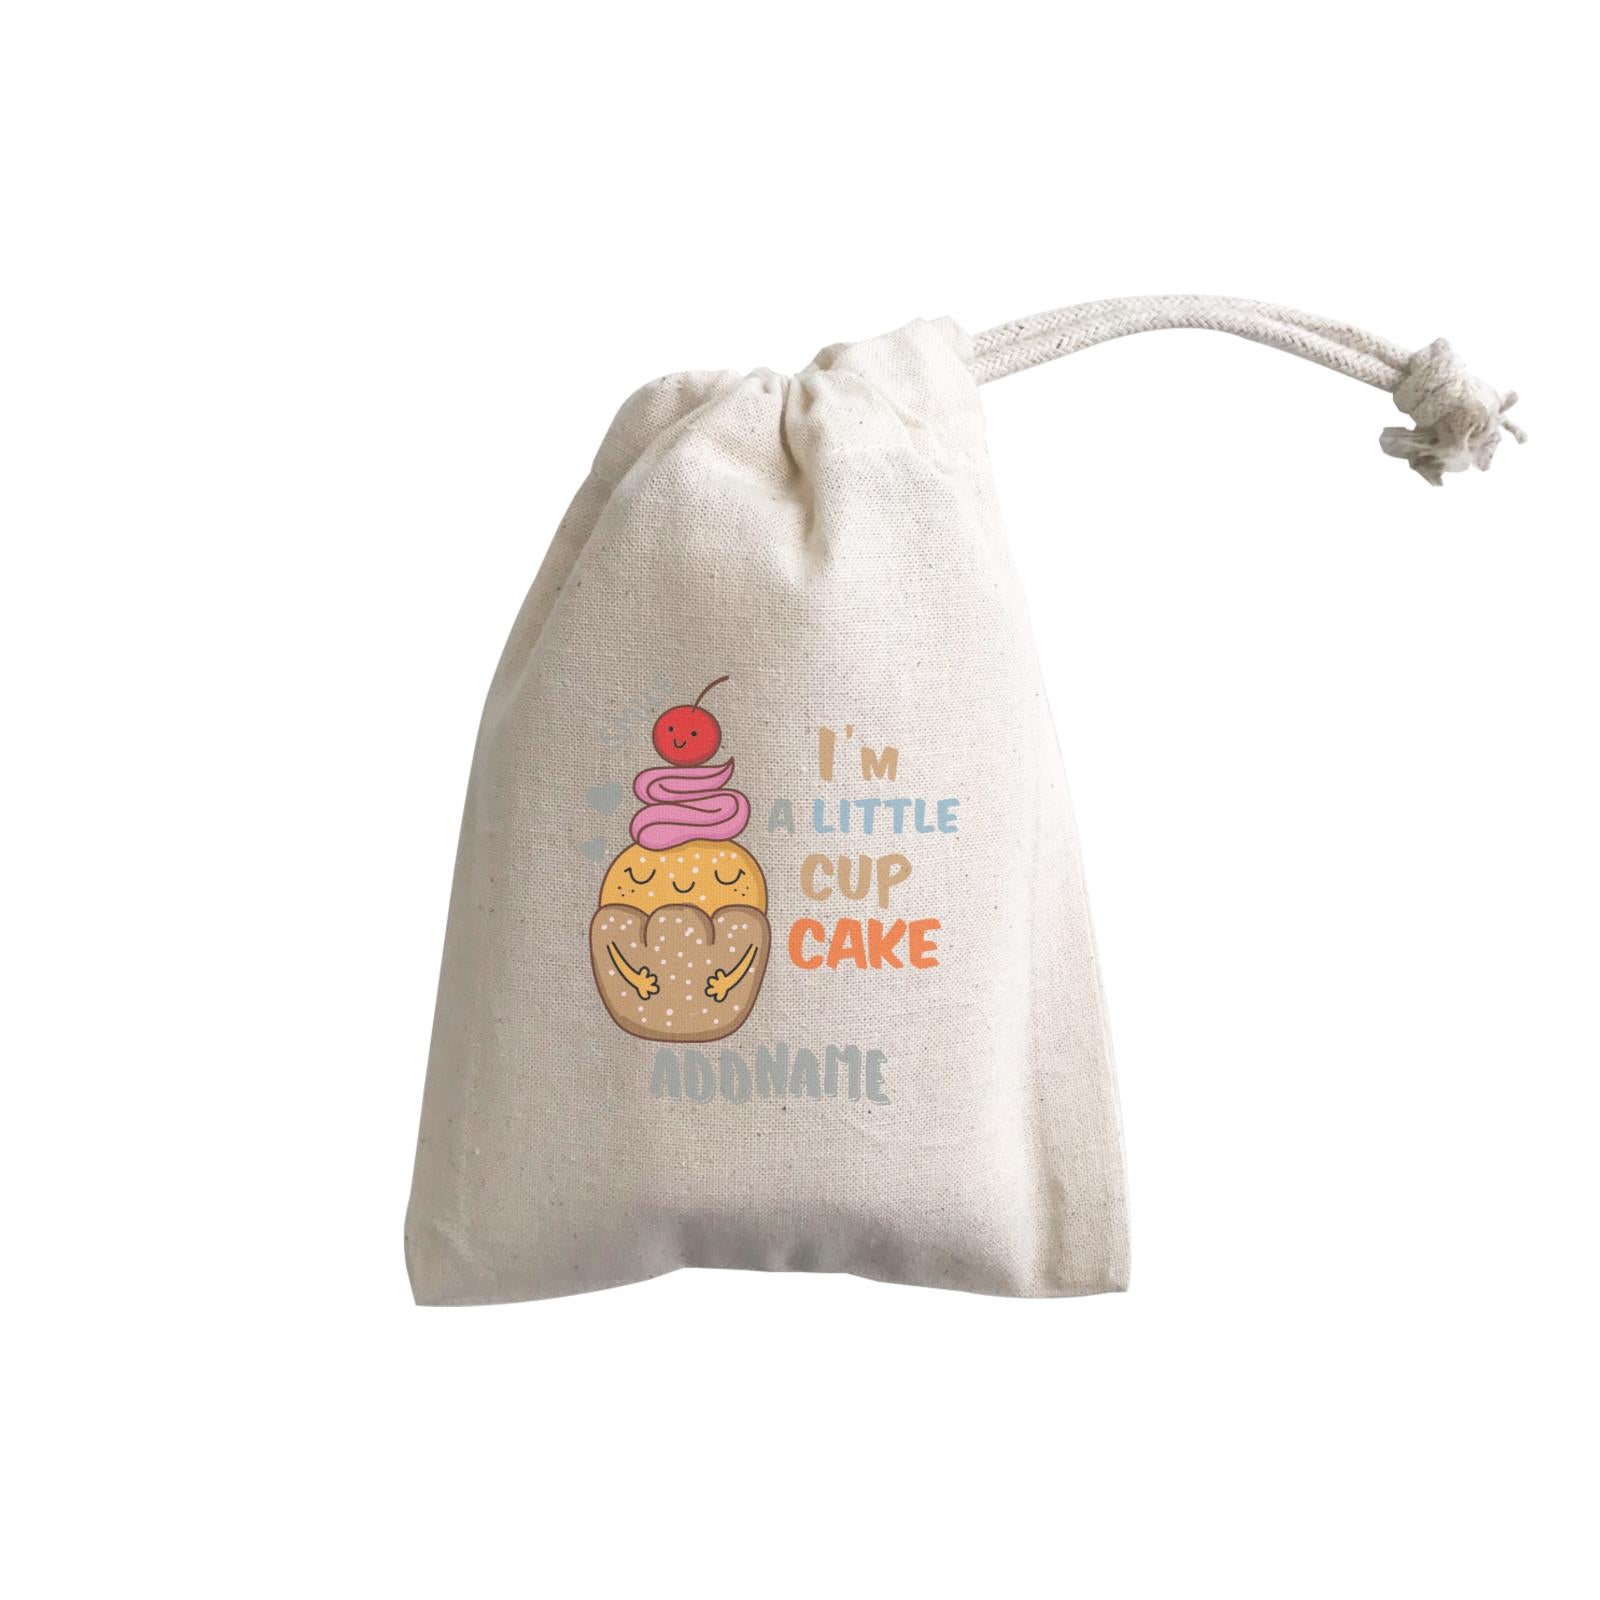 Cool Cute Foods I'm A Little Cup Cake Addname GP Gift Pouch